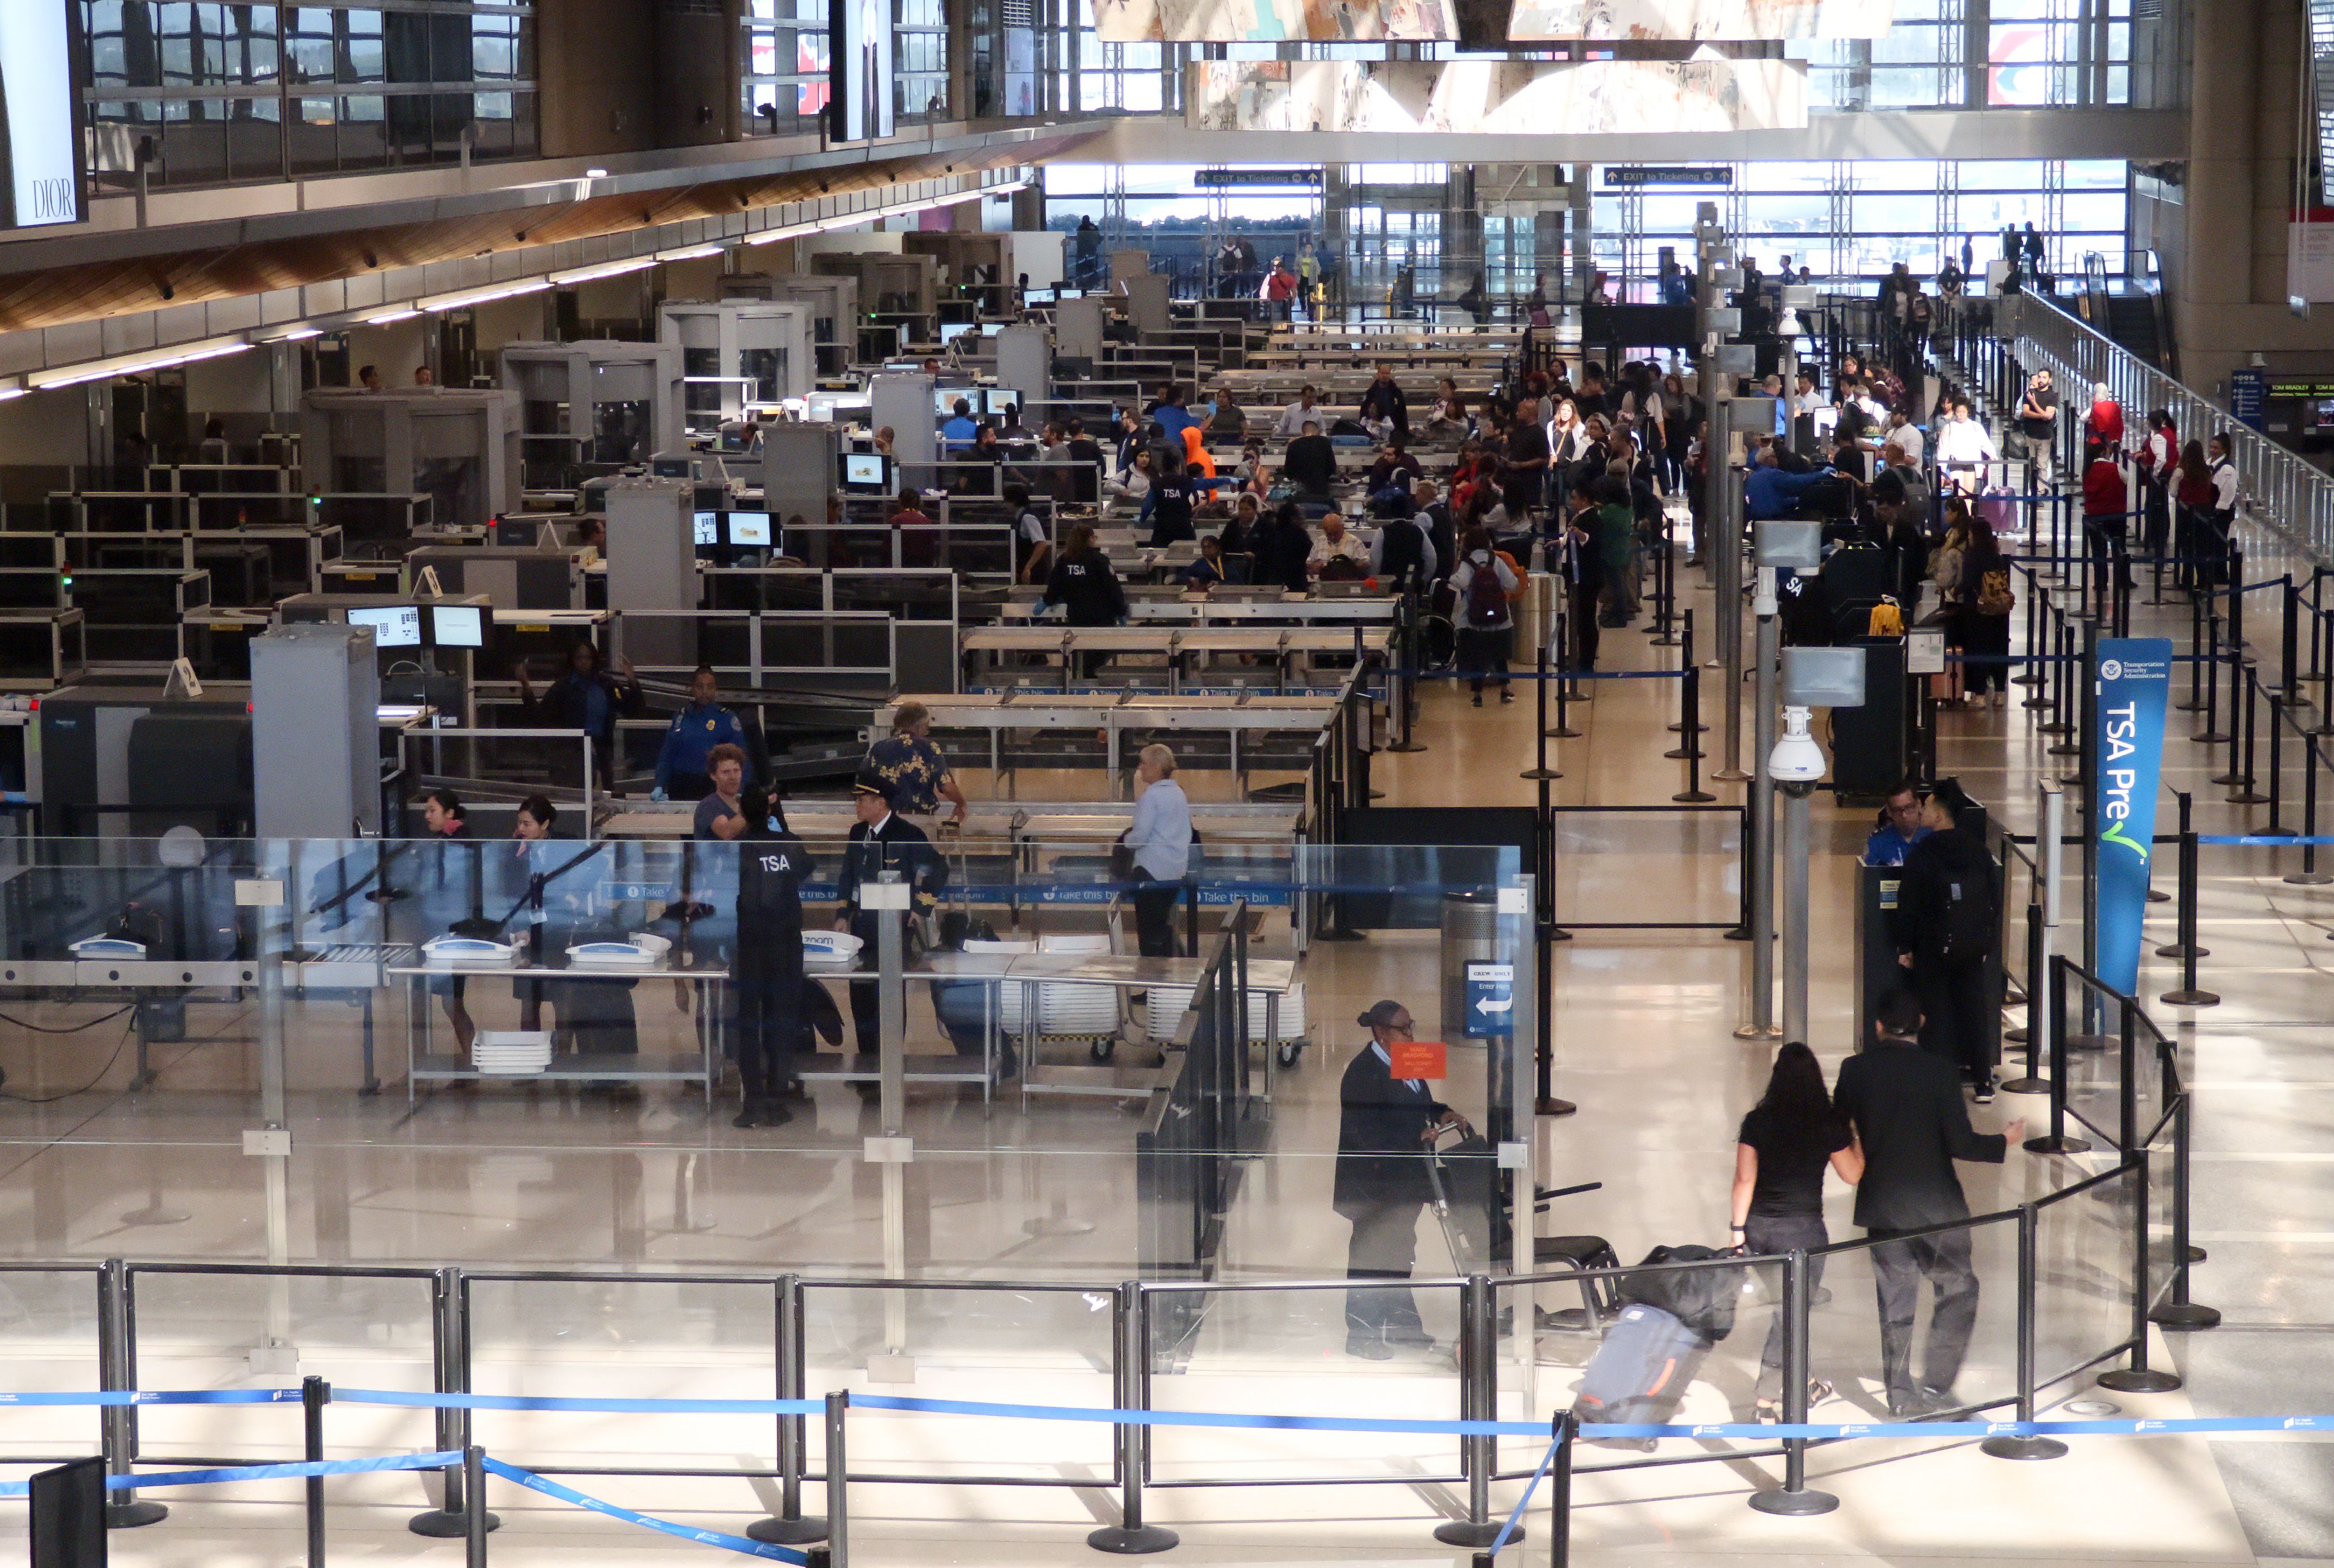 US-TRANSPORT-AIRPORT-SECURITY-LAX